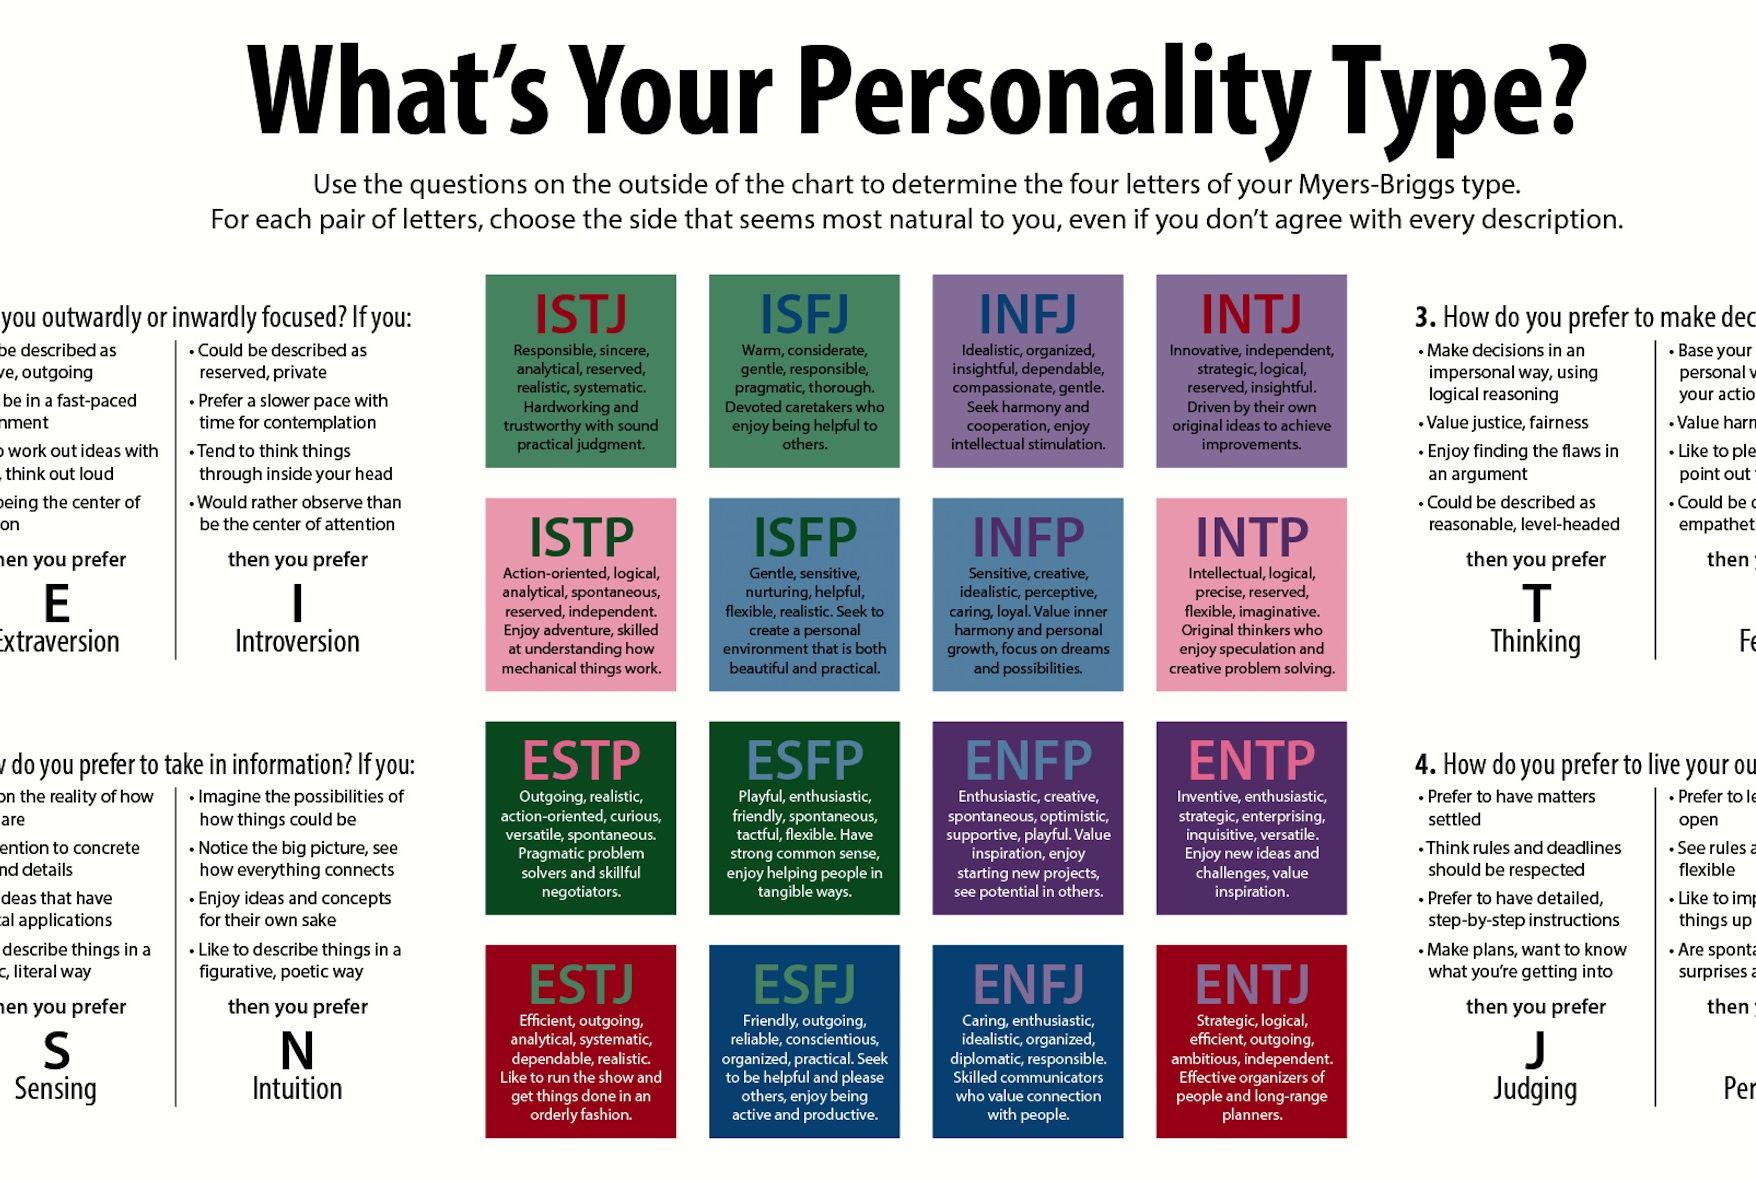 10 Things To Know About The Myers Briggs Type Indicator - 